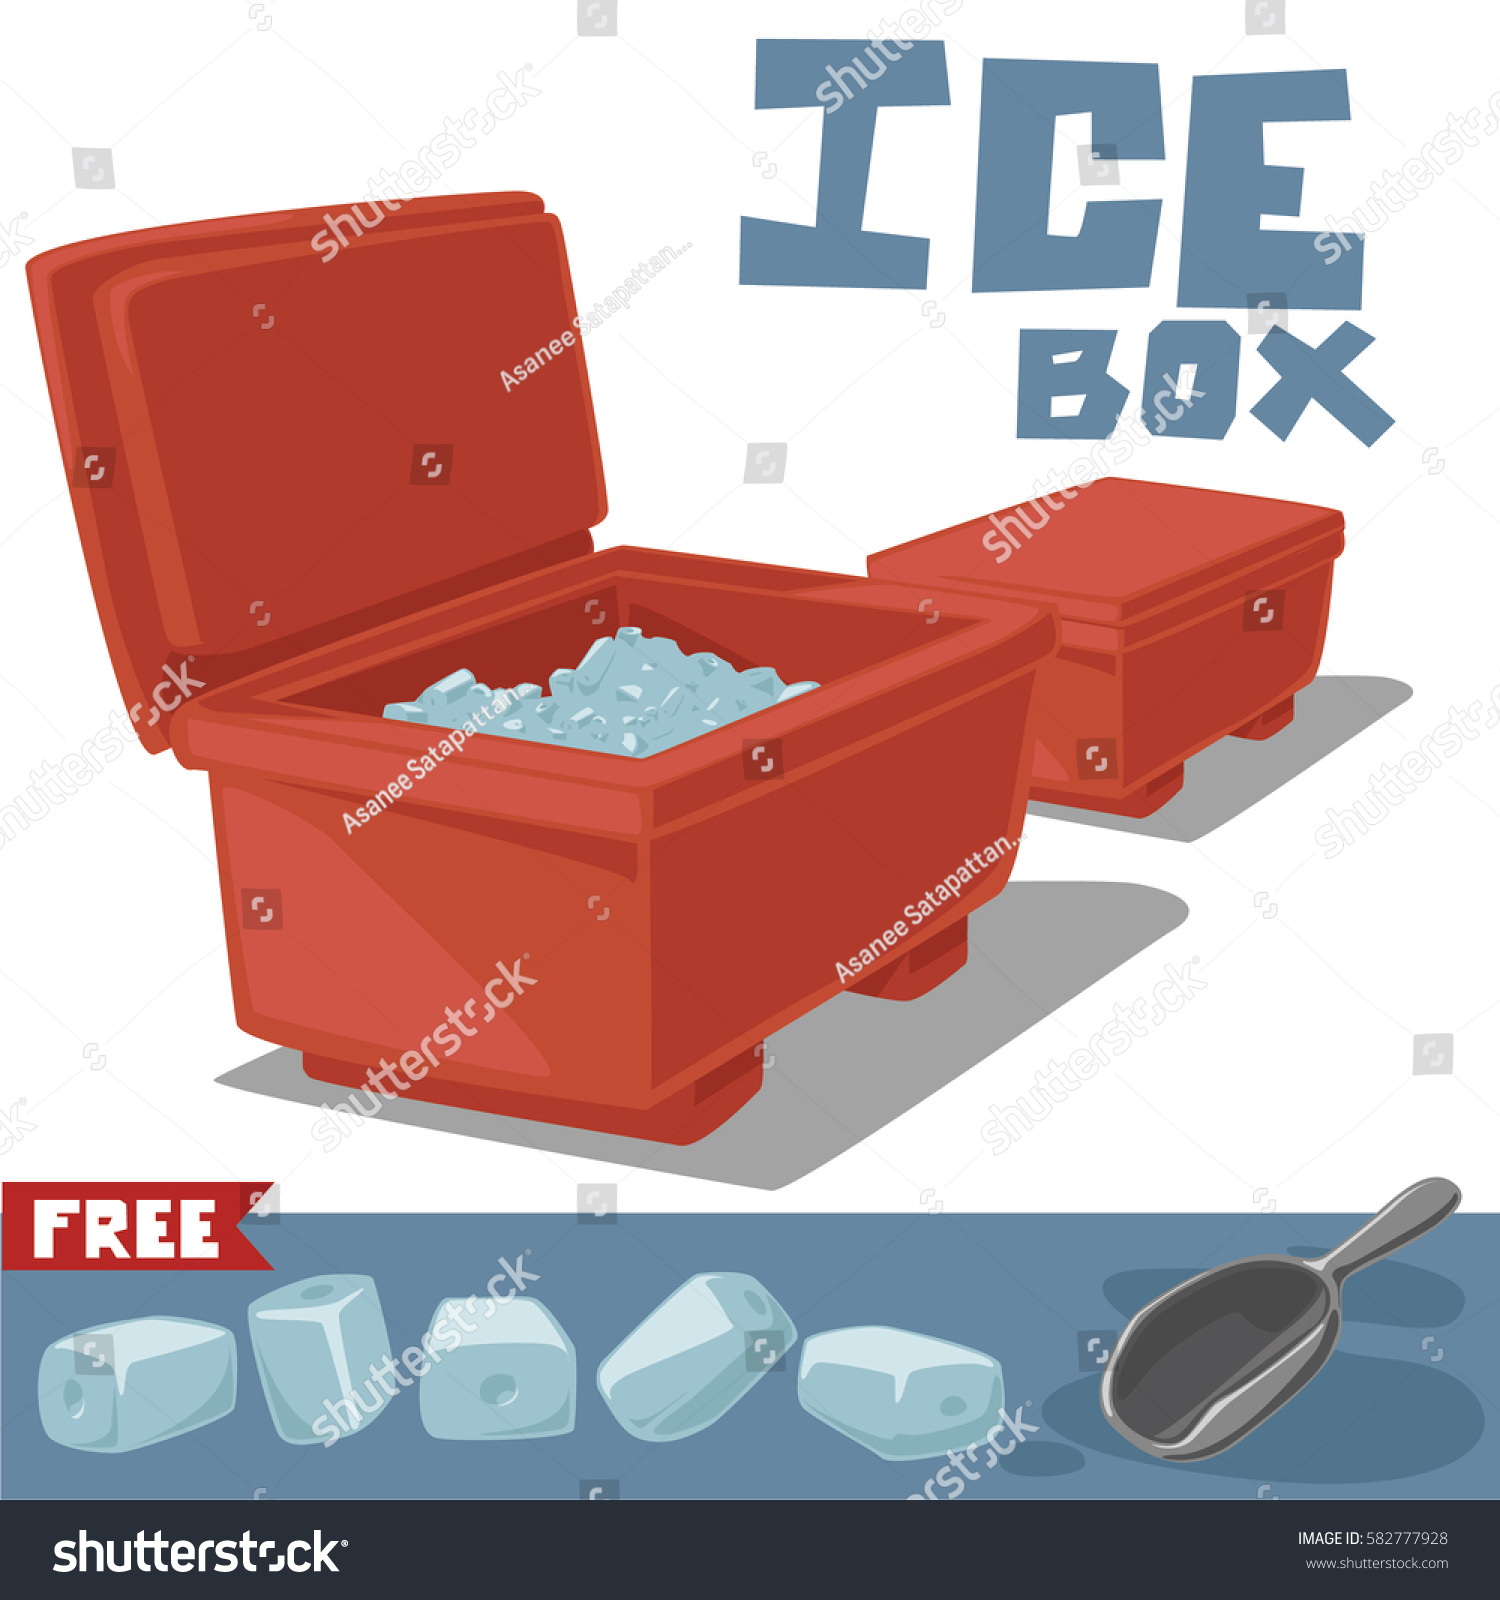 SVG of Open and close ice boxes with ice and ice scoop svg